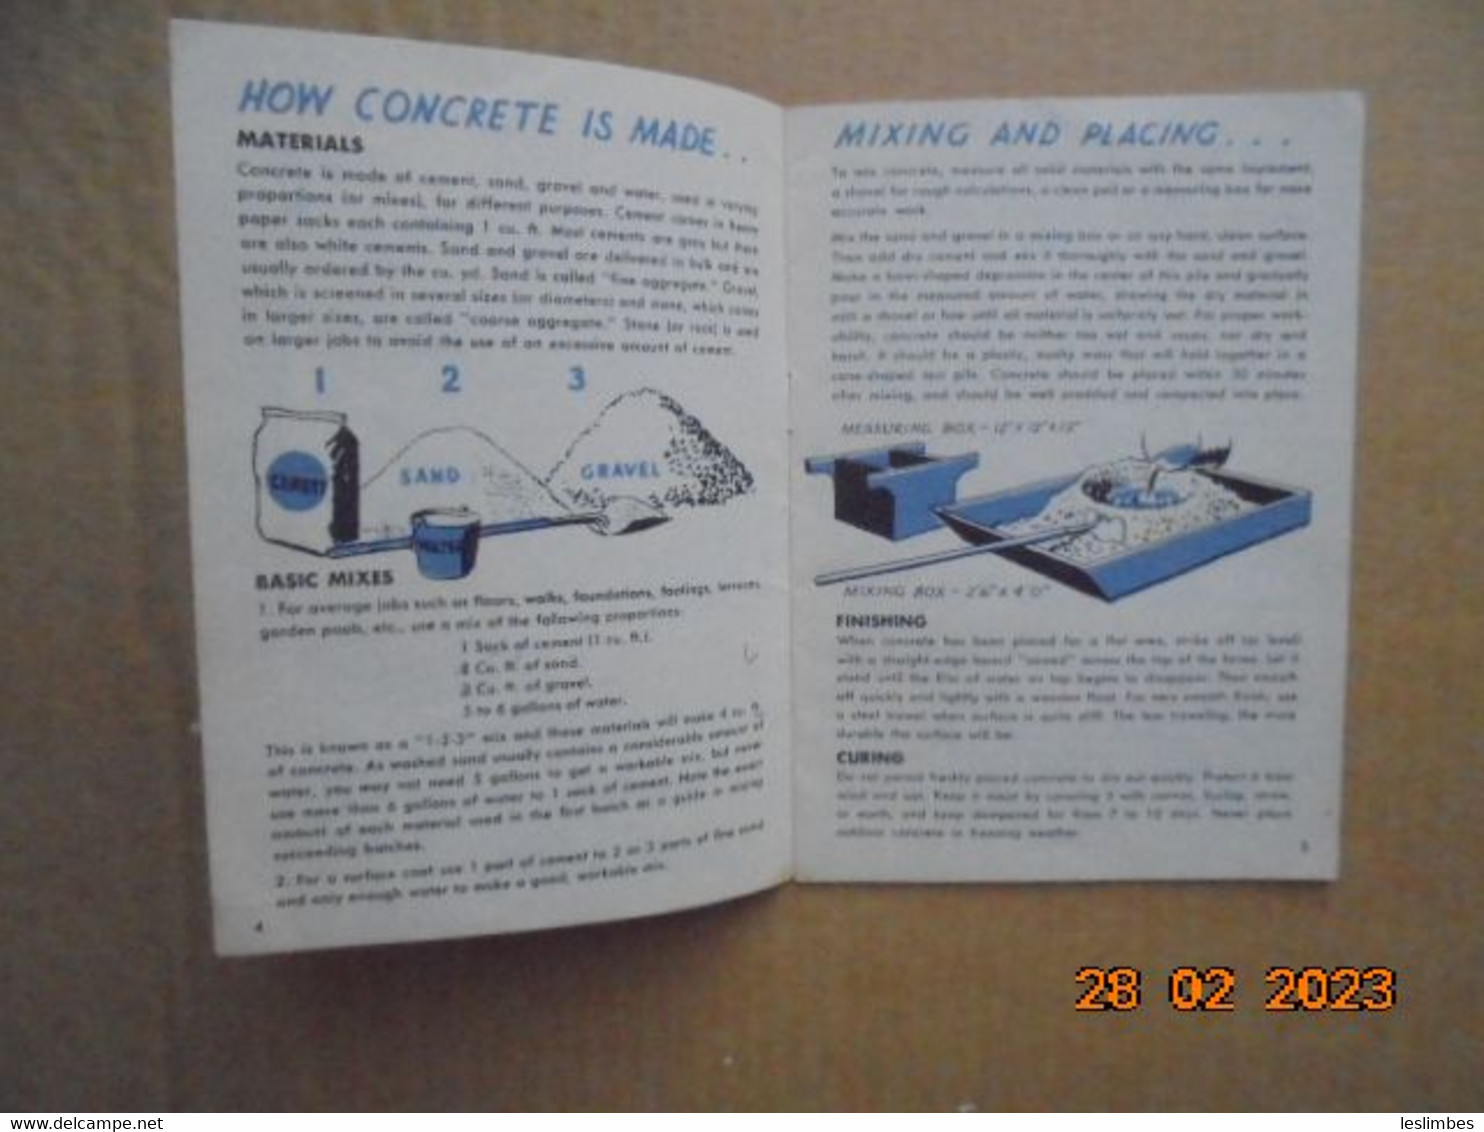 Concrete Ideas: How To Use Concrete Around The House By H. Wood. Mercer Publishing Co. 1953 - Bricolaje